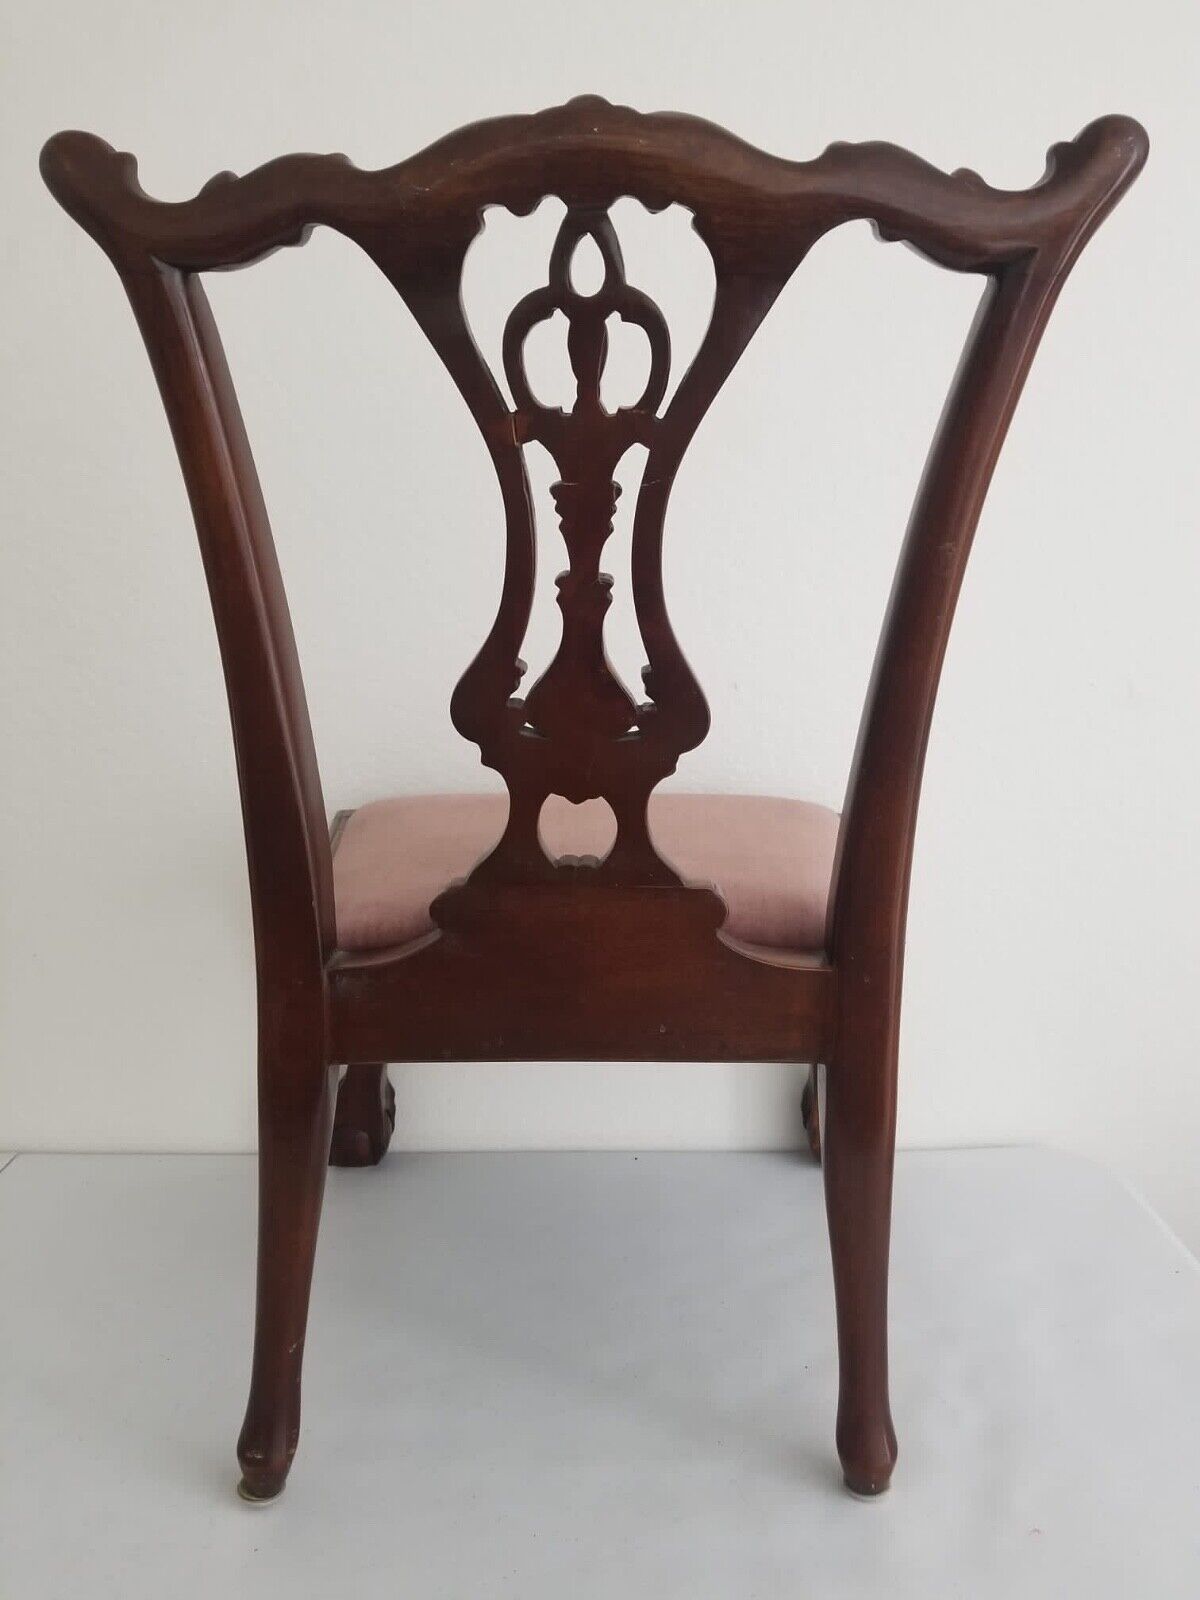 Elegant Antique Chippendale Chair with Cabriole Legs and Claw-and-Ball Feet - Circa 1750s, 26" Width - TreasuTiques